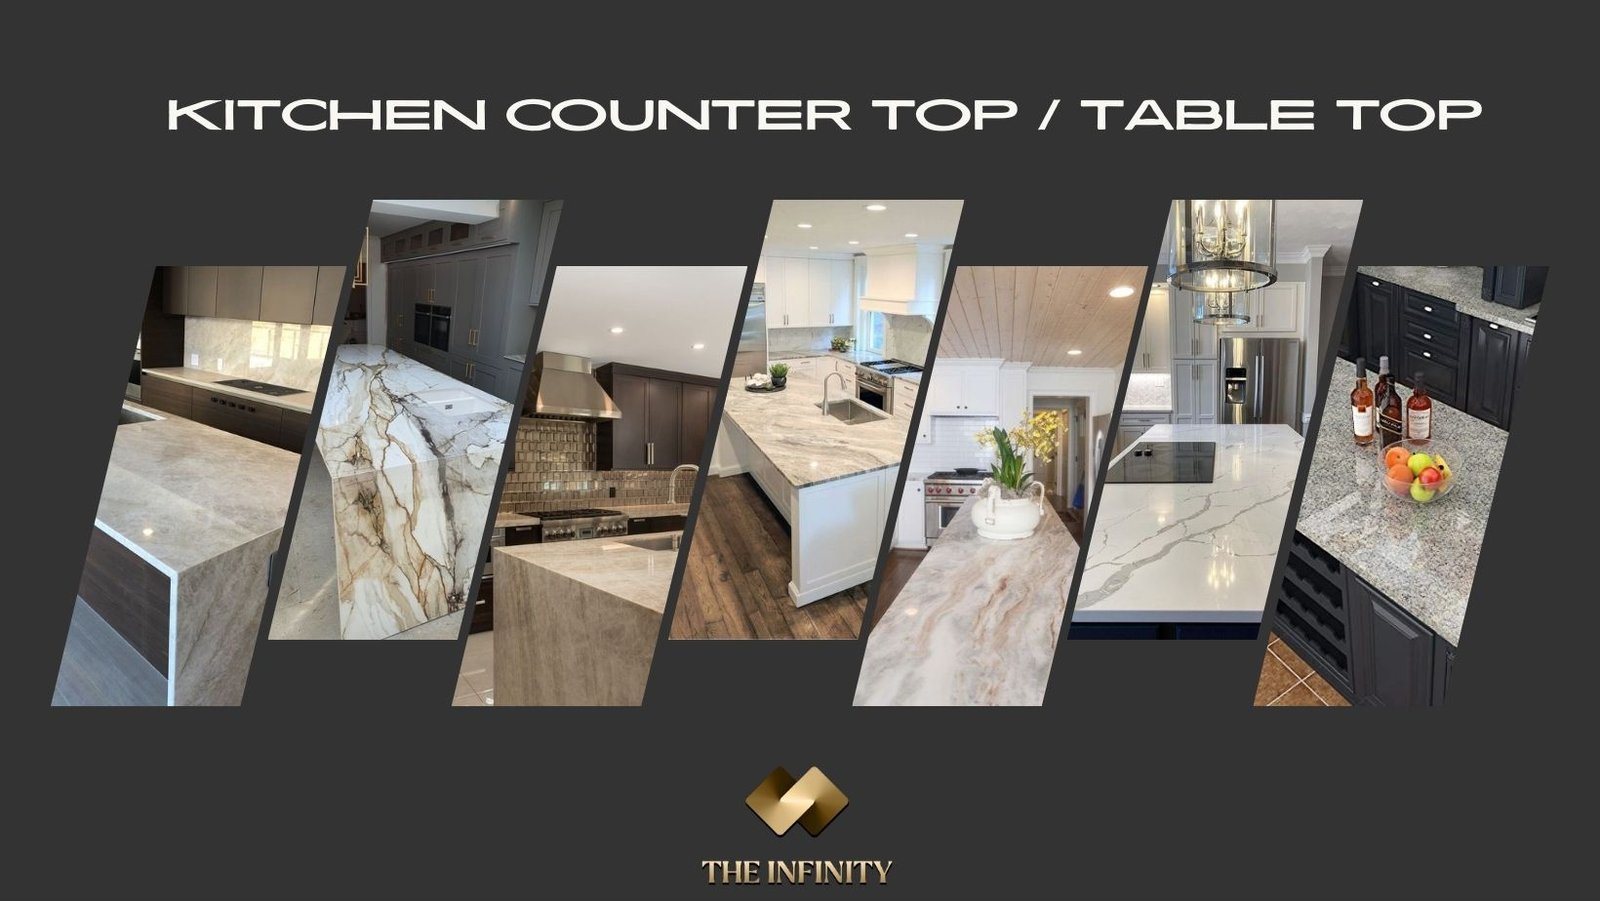 Kitchen counter top / table top